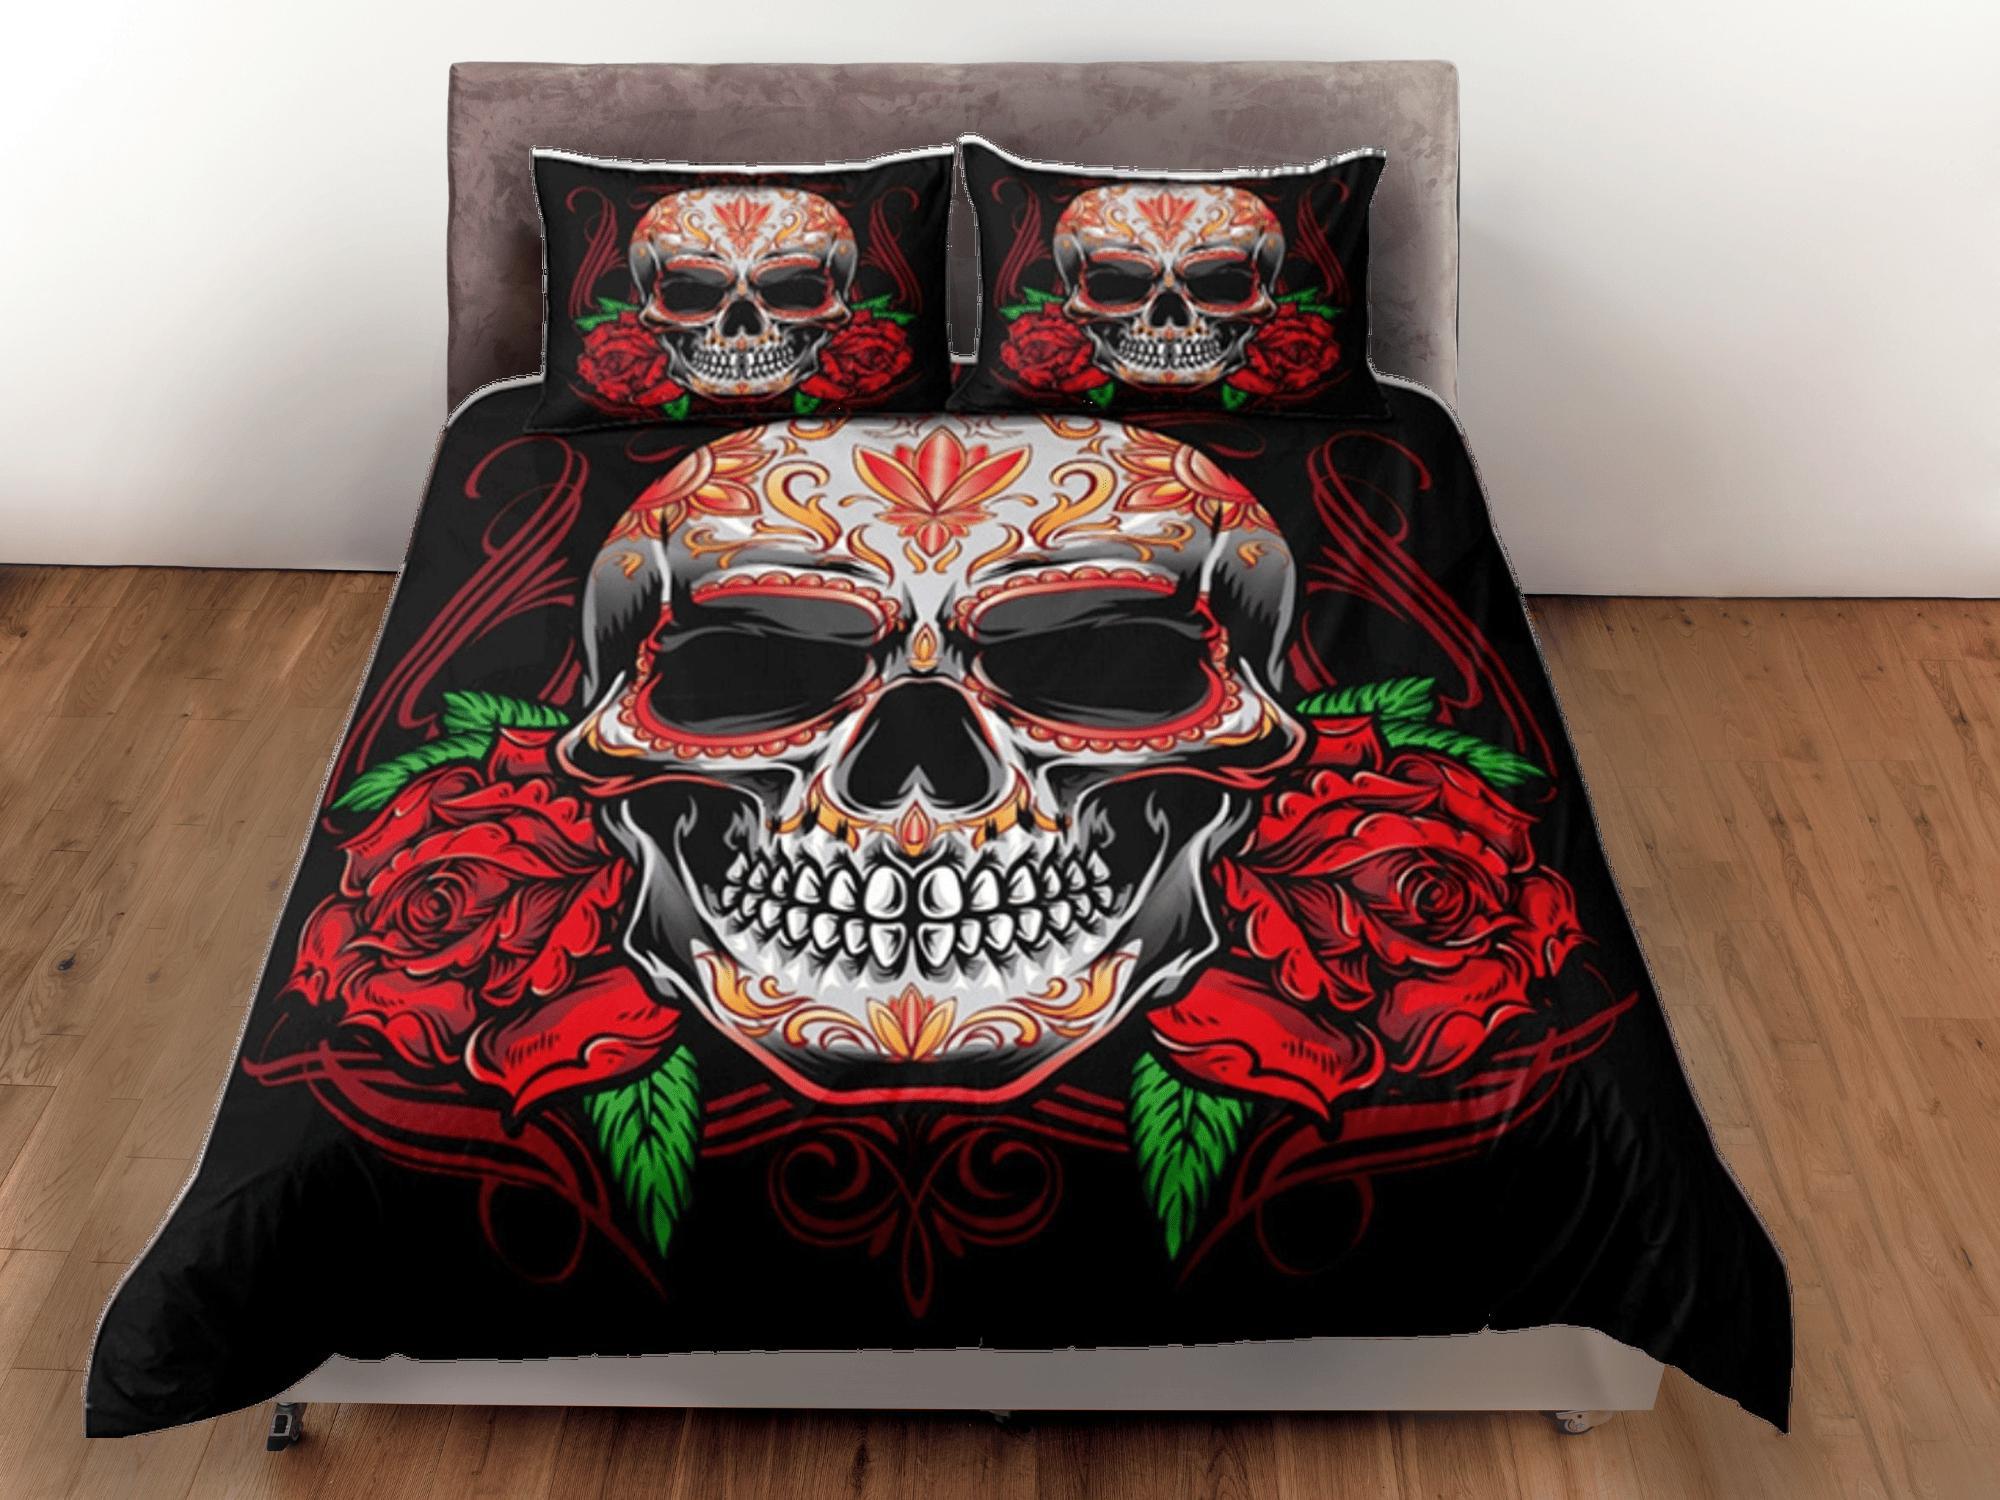 daintyduvet Skull and Roses Gothic Red Duvet Cover Set Bedspread, Dorm Bedding with Pillowcase